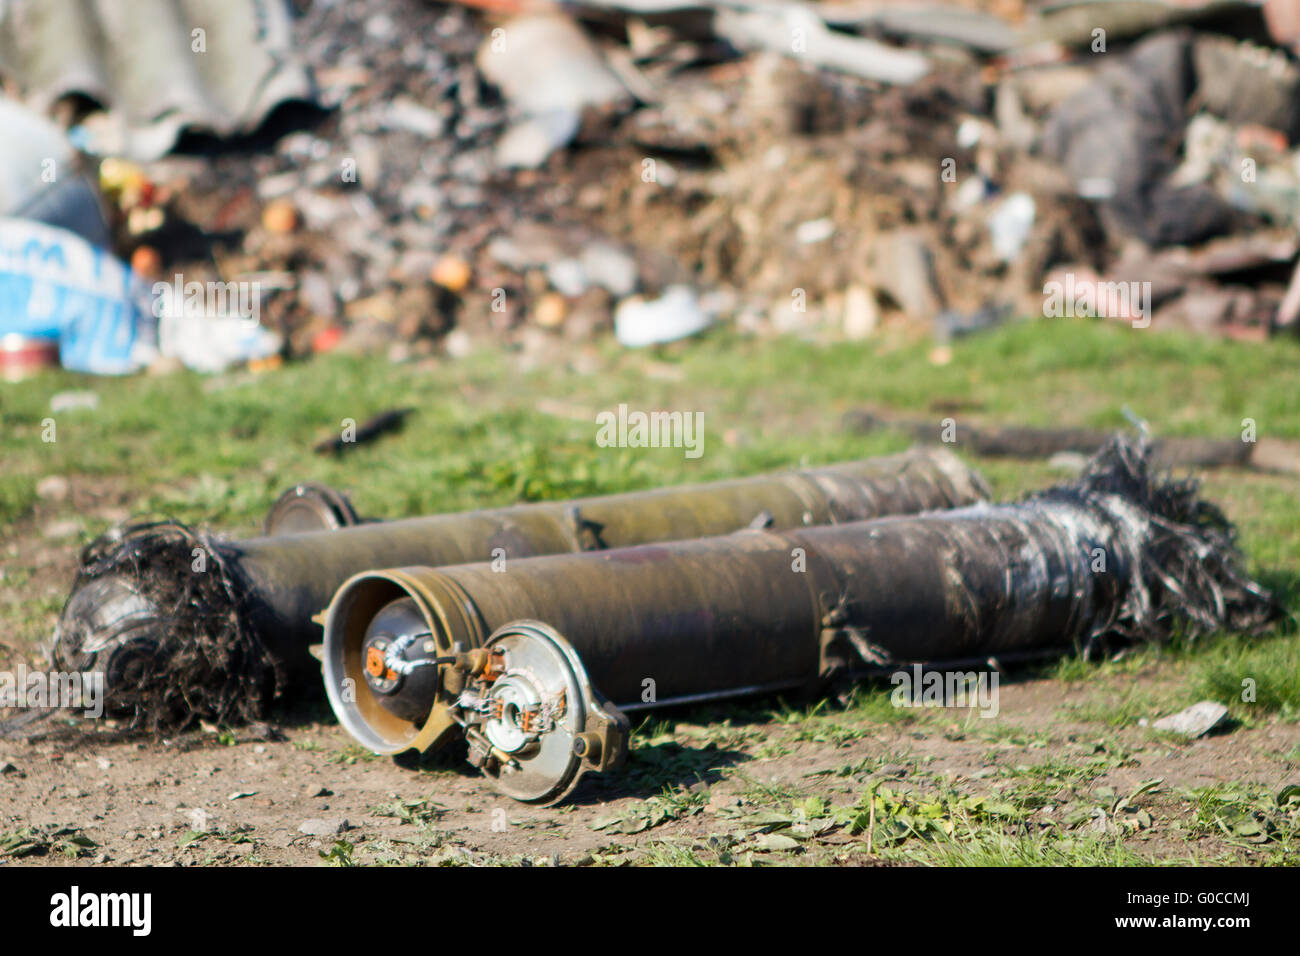 unexploded ordnance from multiple rocket launchers Stock Photo